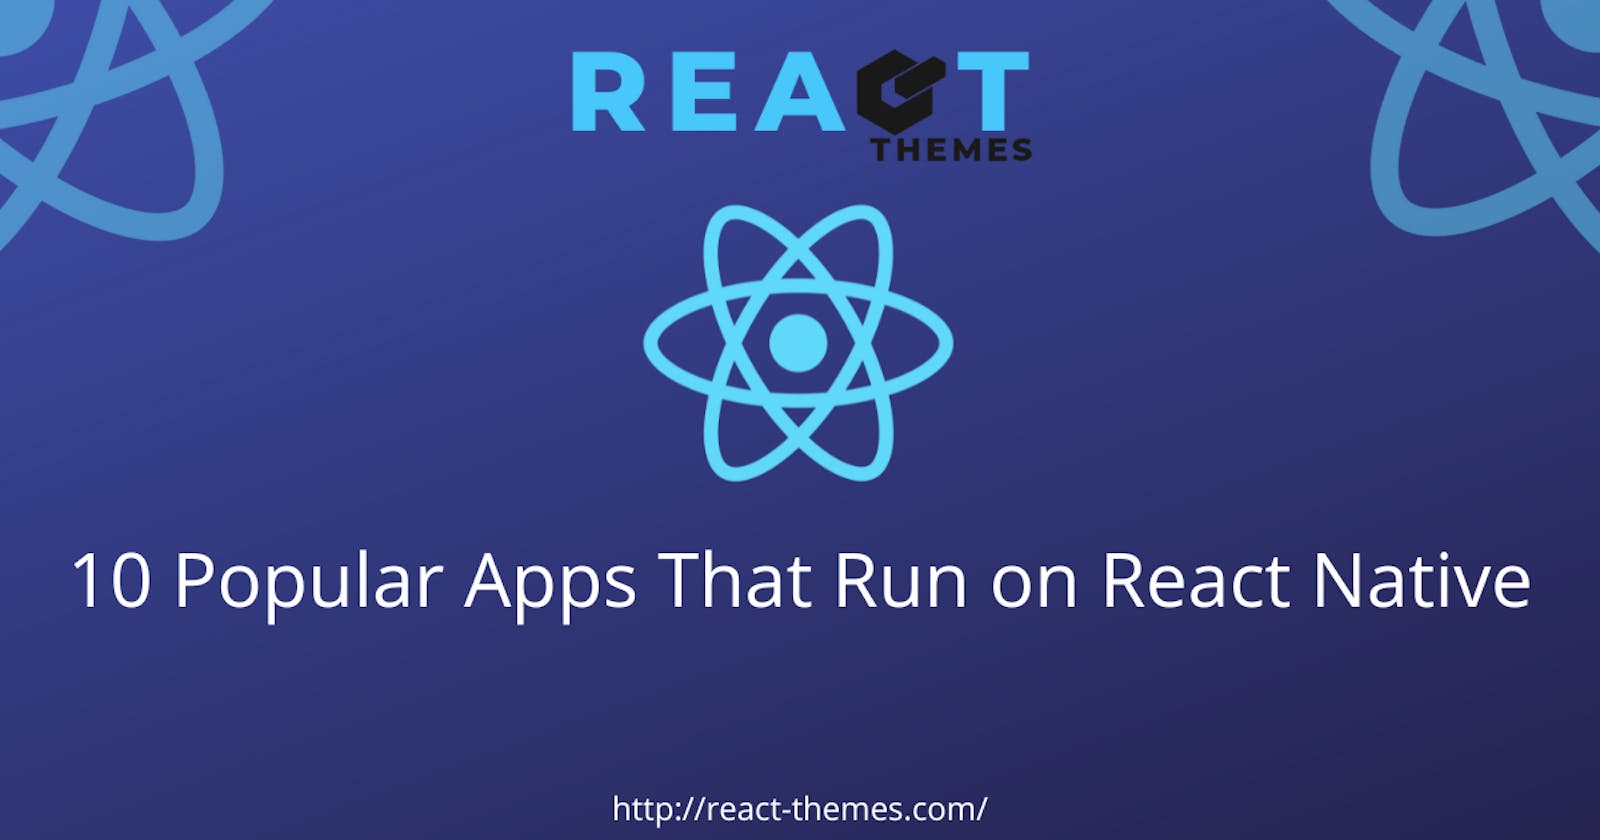 10 Popular Apps That Run on React Native